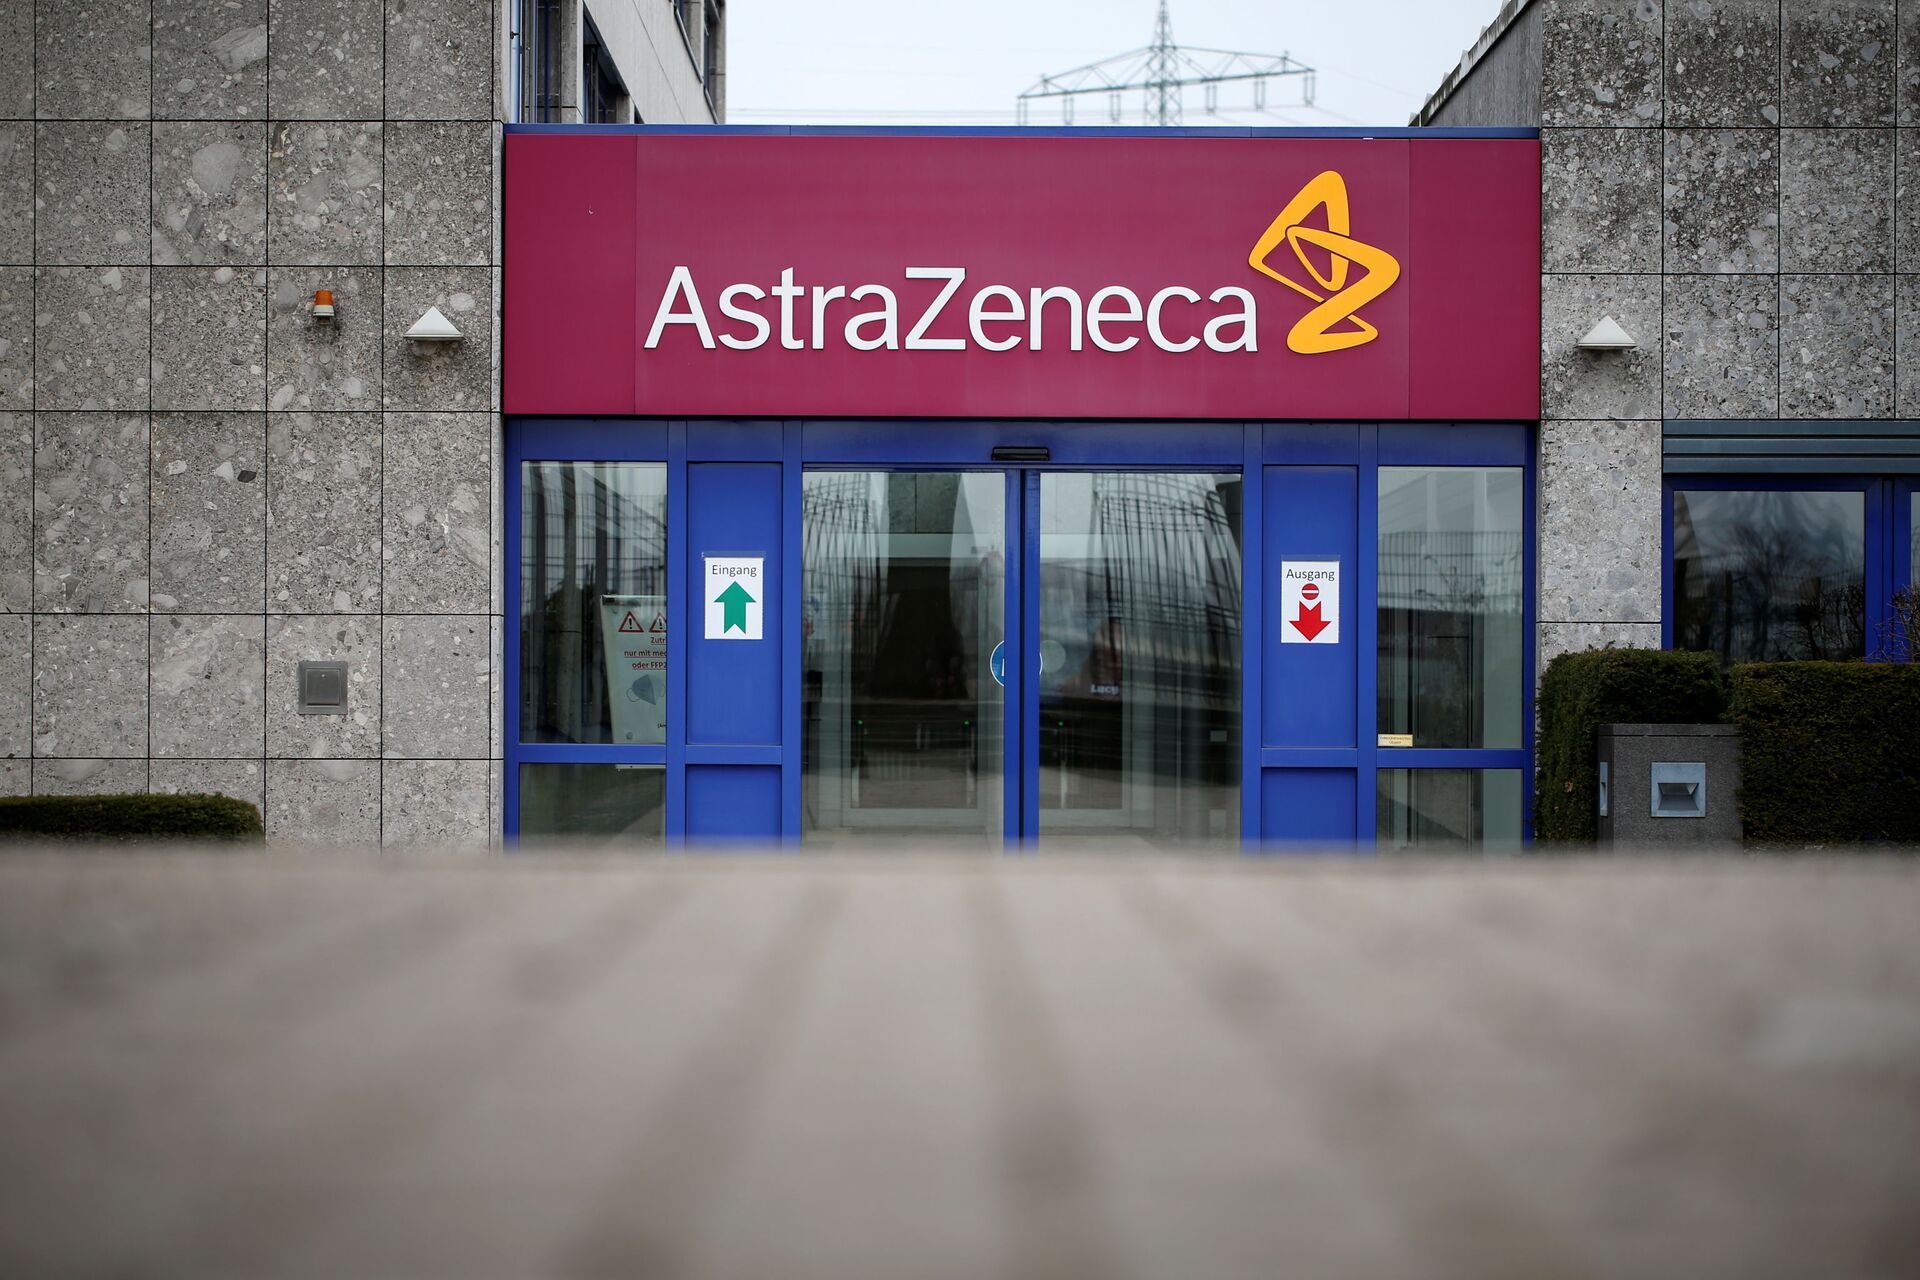 Fear of Fatal Blood Clots Cited as Spate of Countries Move to Halt Use of AstraZeneca COVID Jabs - Sputnik International, 1920, 11.03.2021